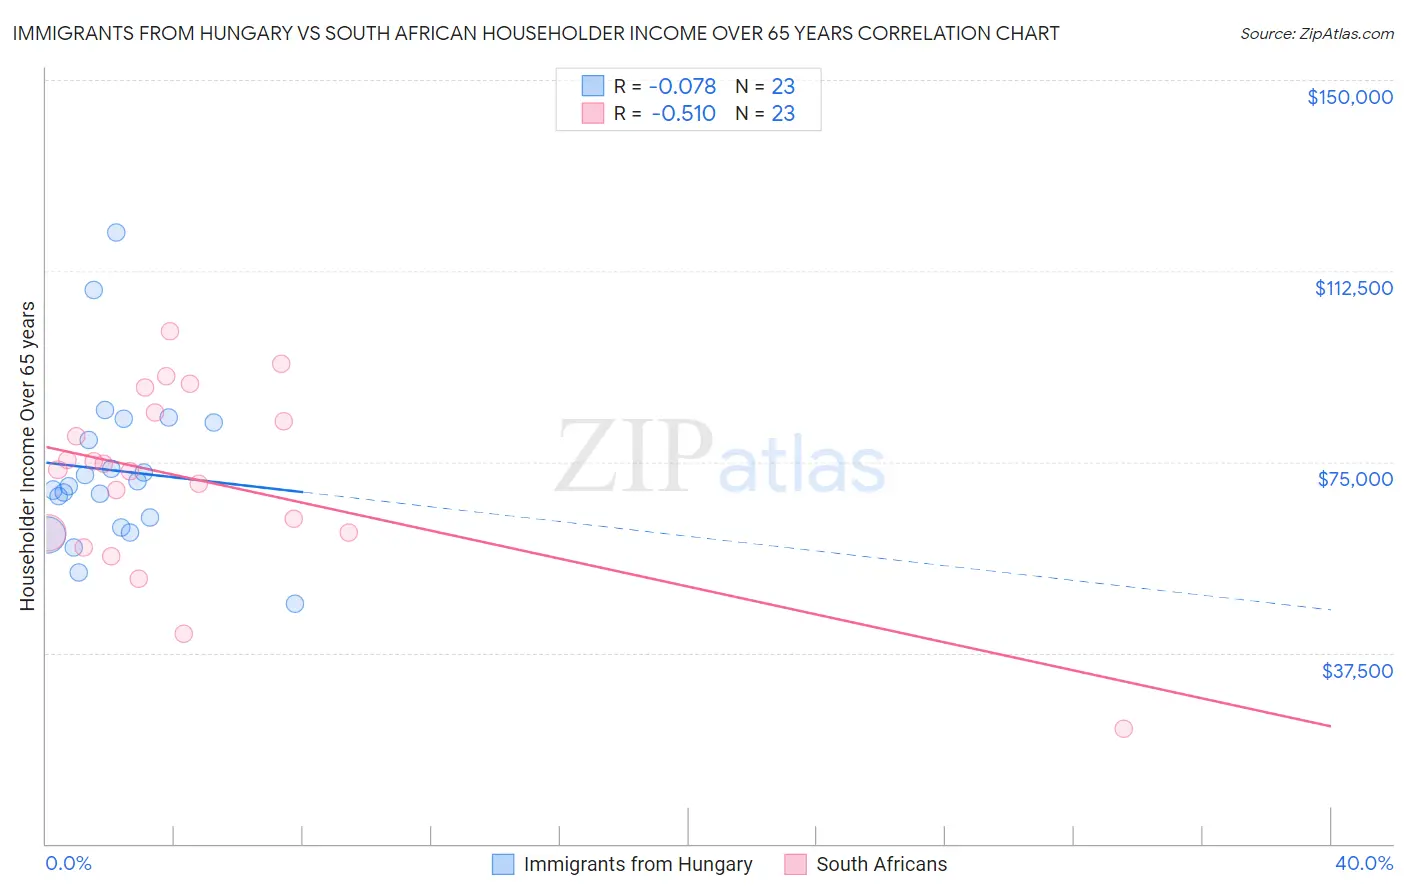 Immigrants from Hungary vs South African Householder Income Over 65 years